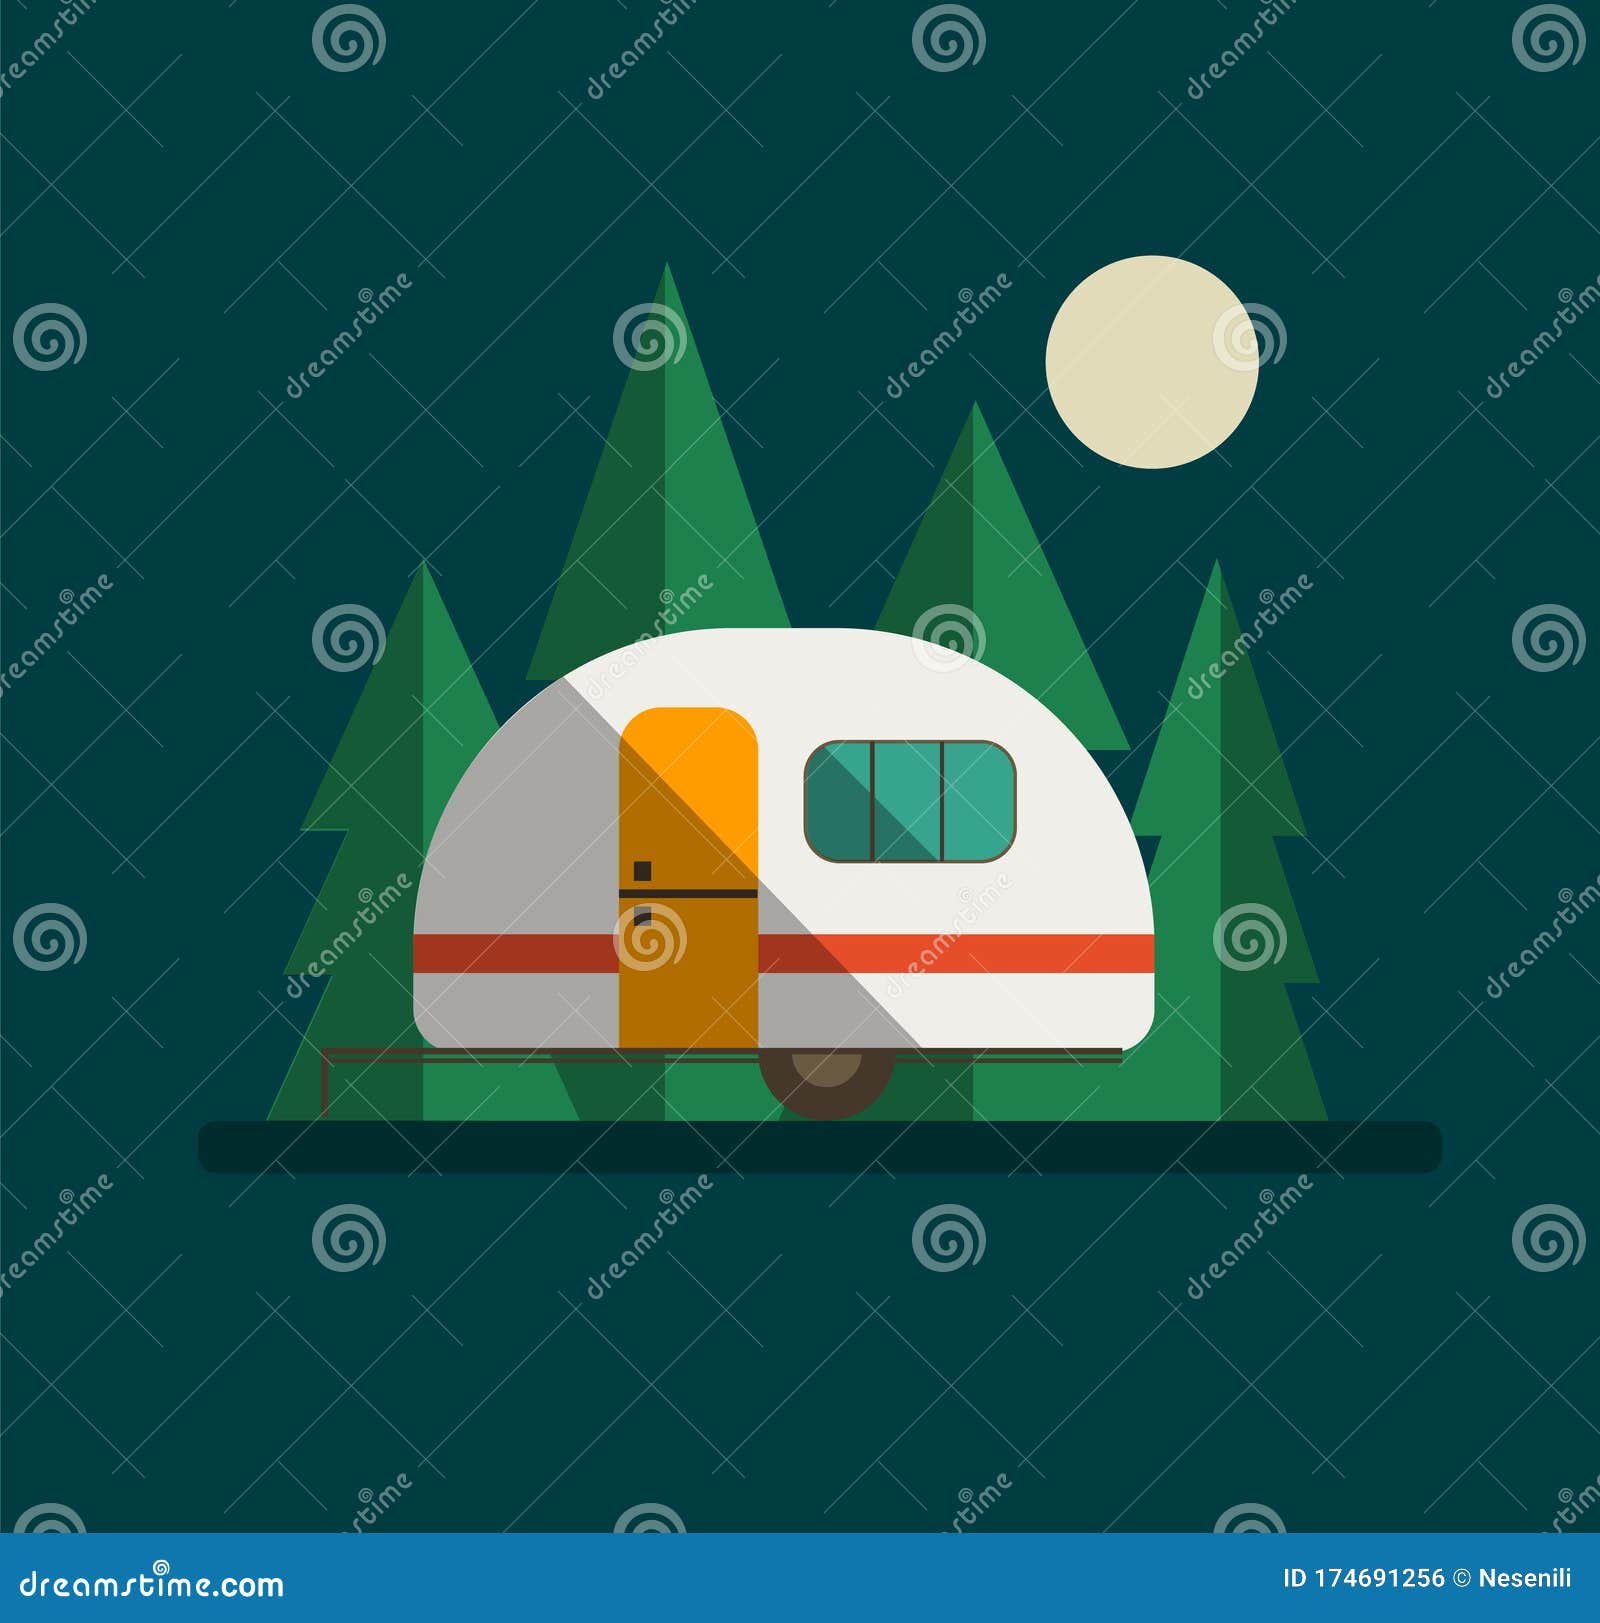 Camper Trailer on the Road with Trees and Moon Stock Illustration ...